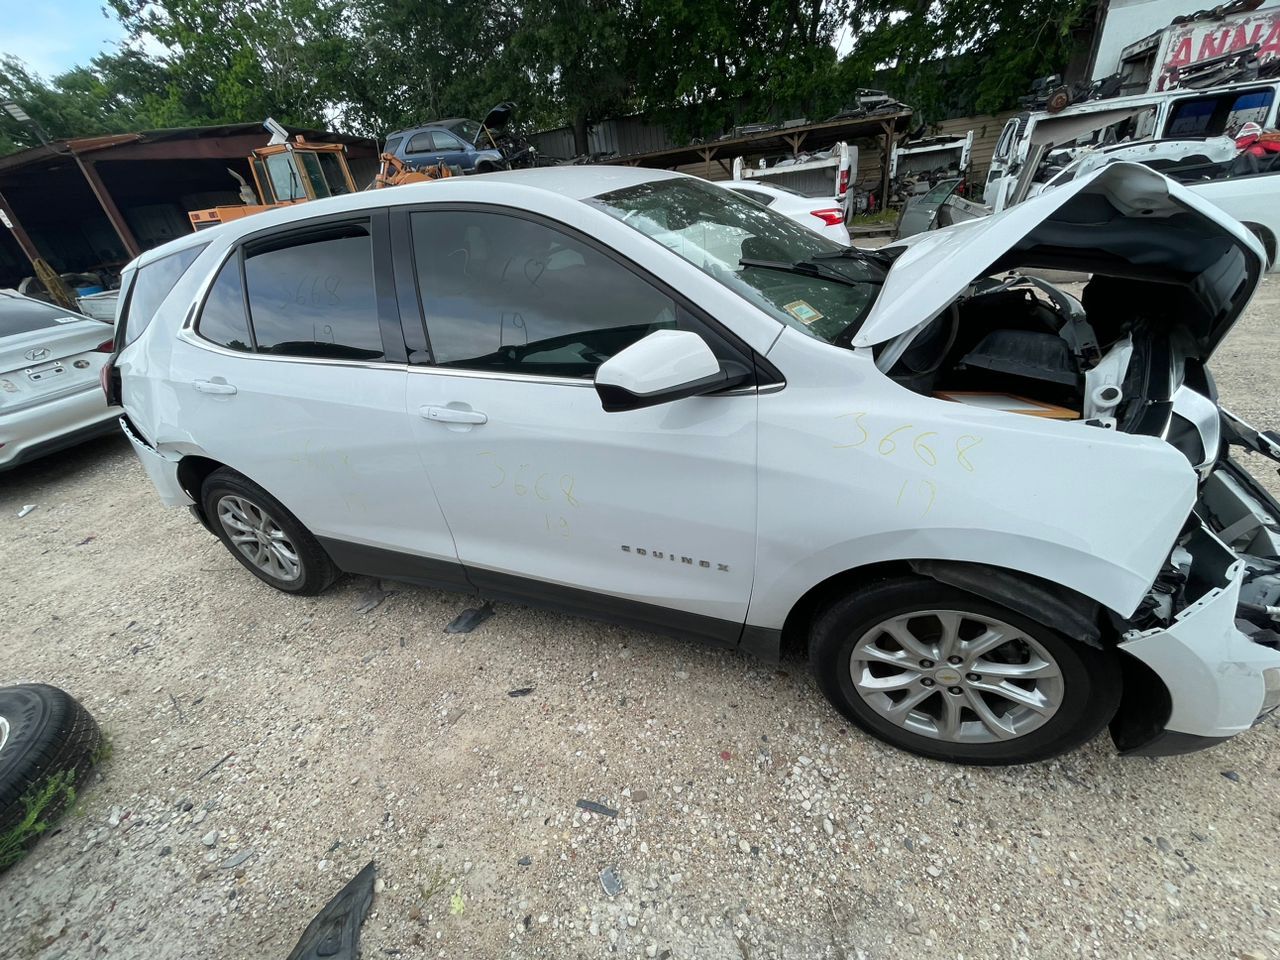 2019 Chevy Equinox For Parts 